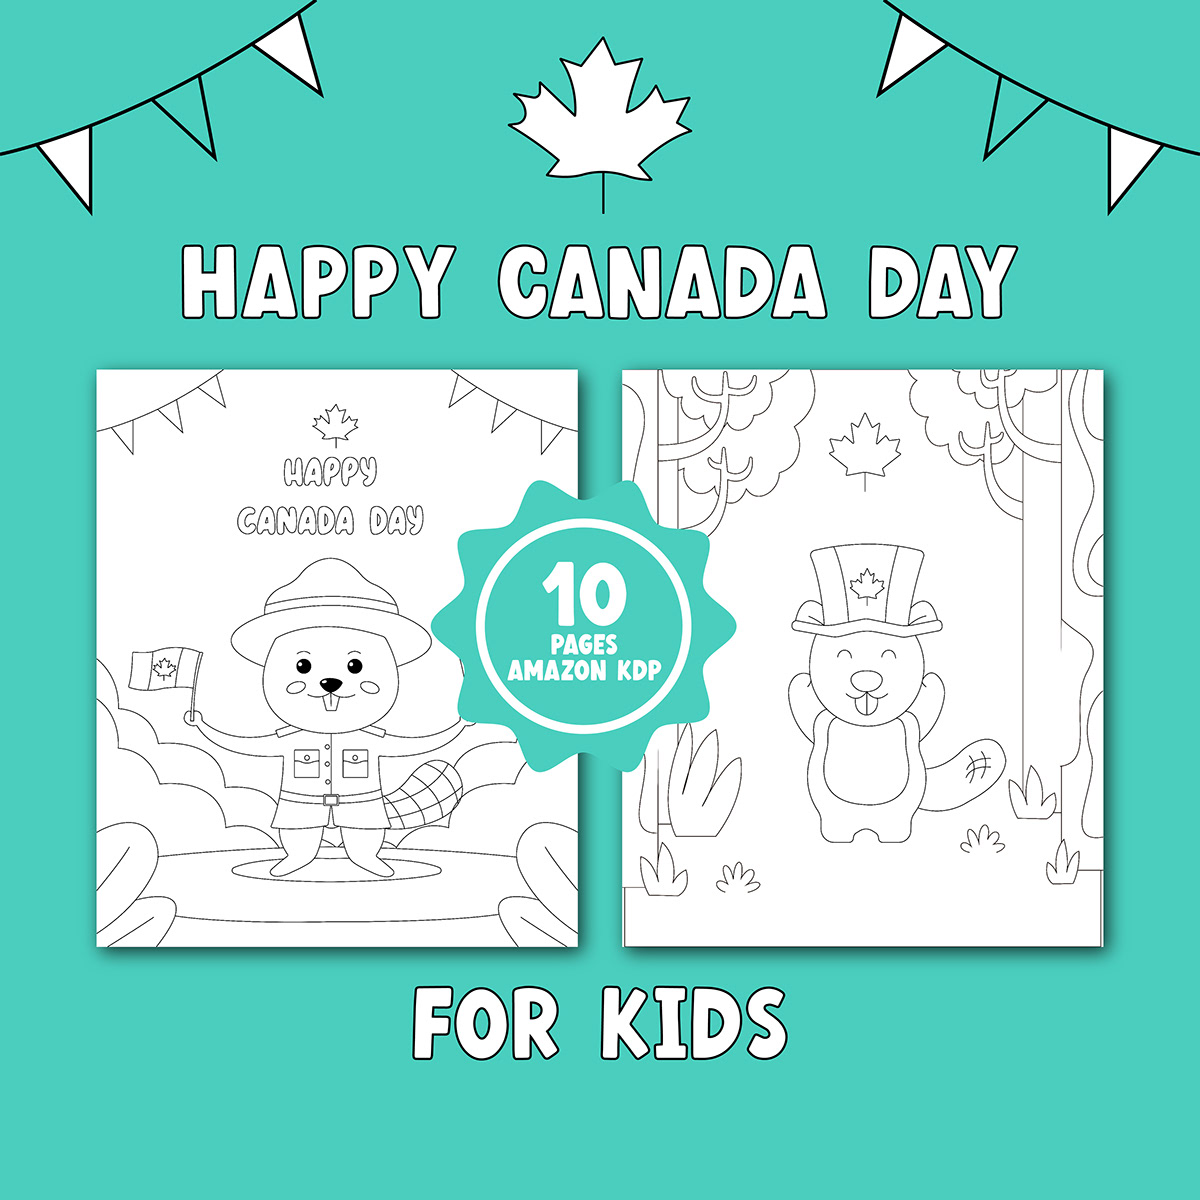 Happy Canada Day Coloring Pages For Children  

You Can Hire me in Behance  also Fiverr